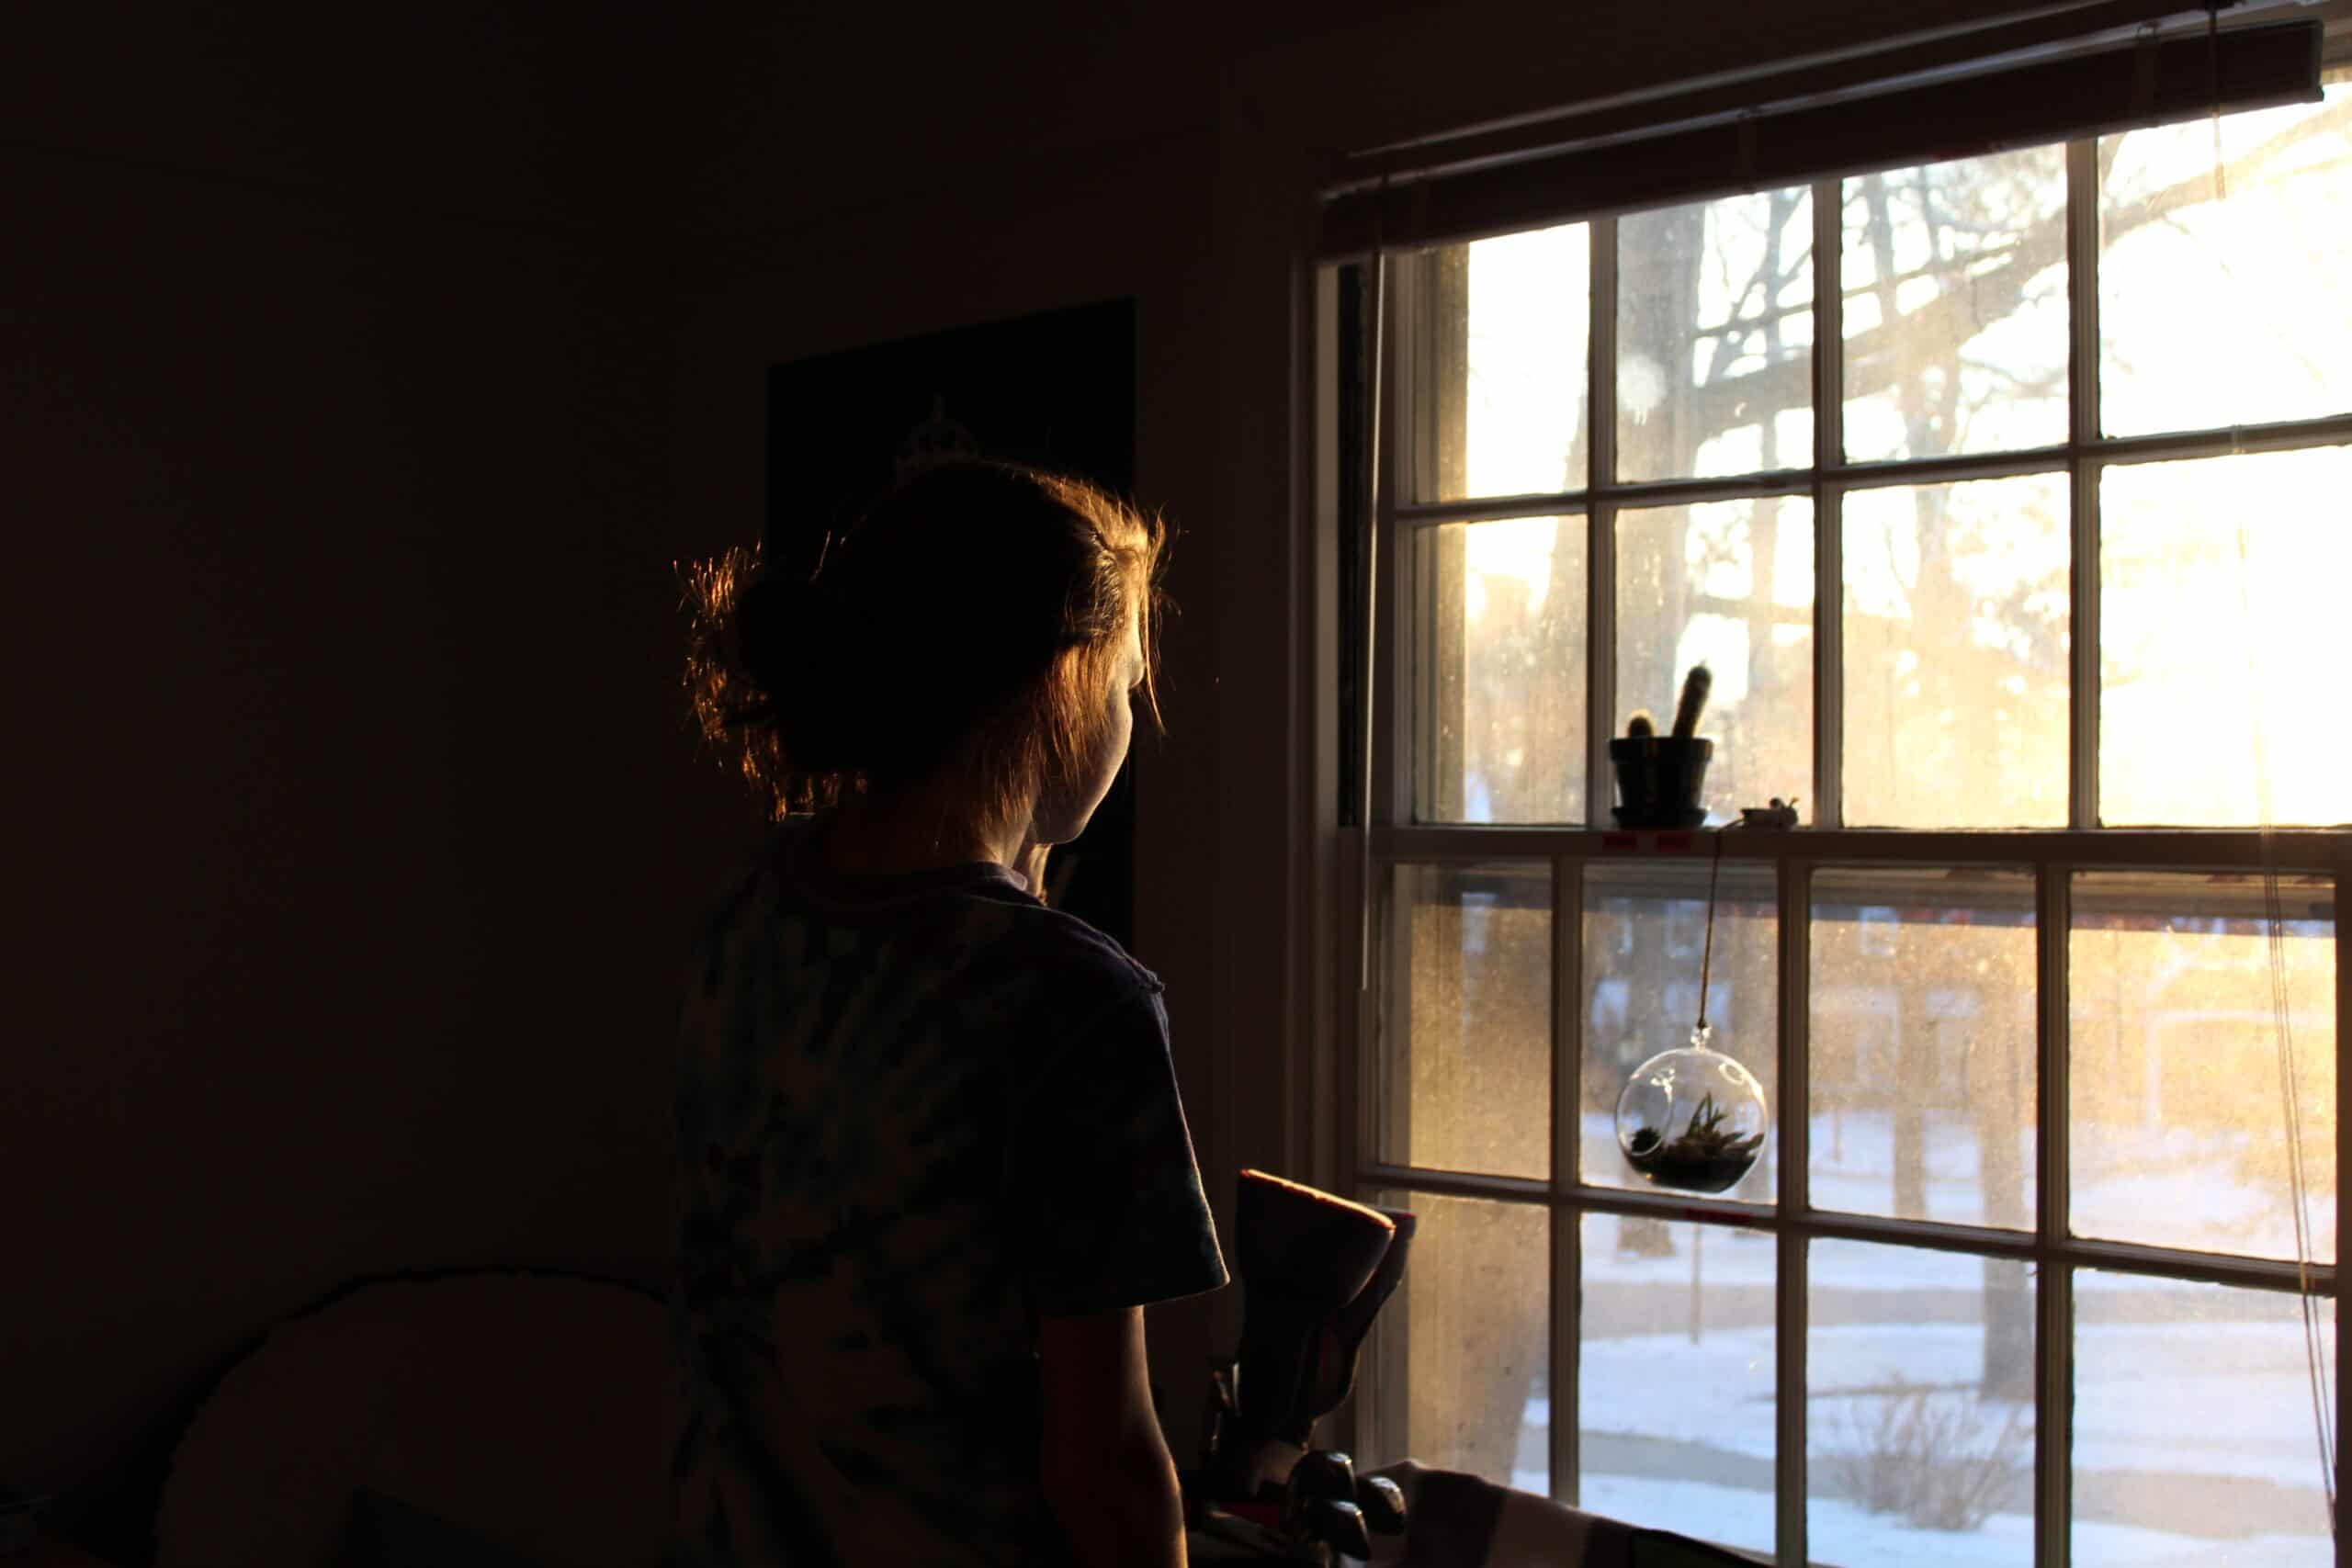 A person standing in a dark room looking out a window at the sunset. Trauma can feel isolating, but you're not alone. 